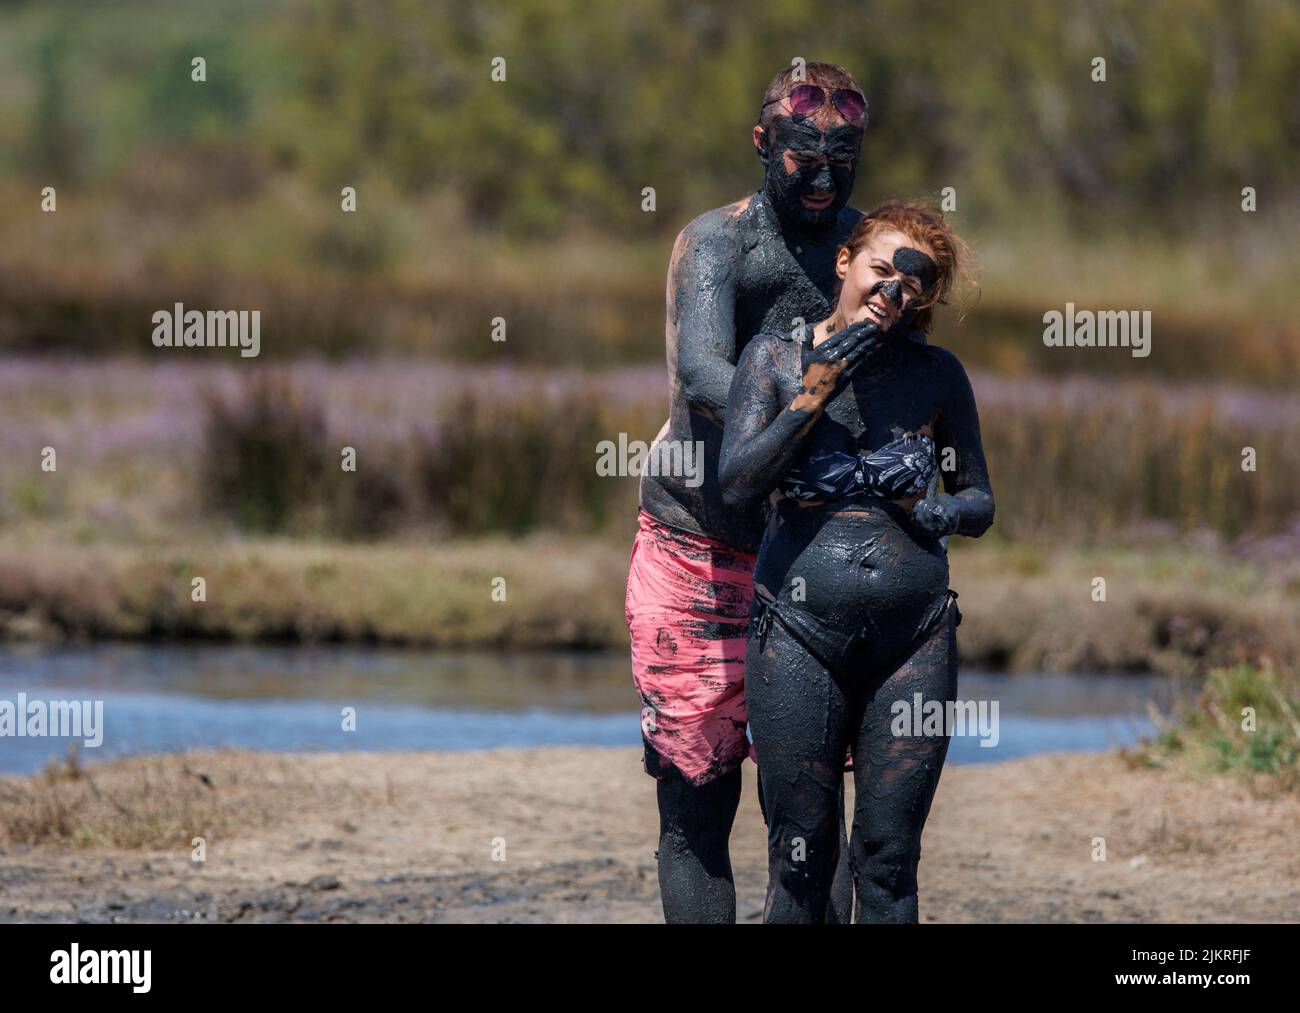 A couple smear themselves with mud that is believed to be curative at Queen's beach in Nin, Croatia, August 3, 2022. REUTERS/Antonio Bronic Stock Photo